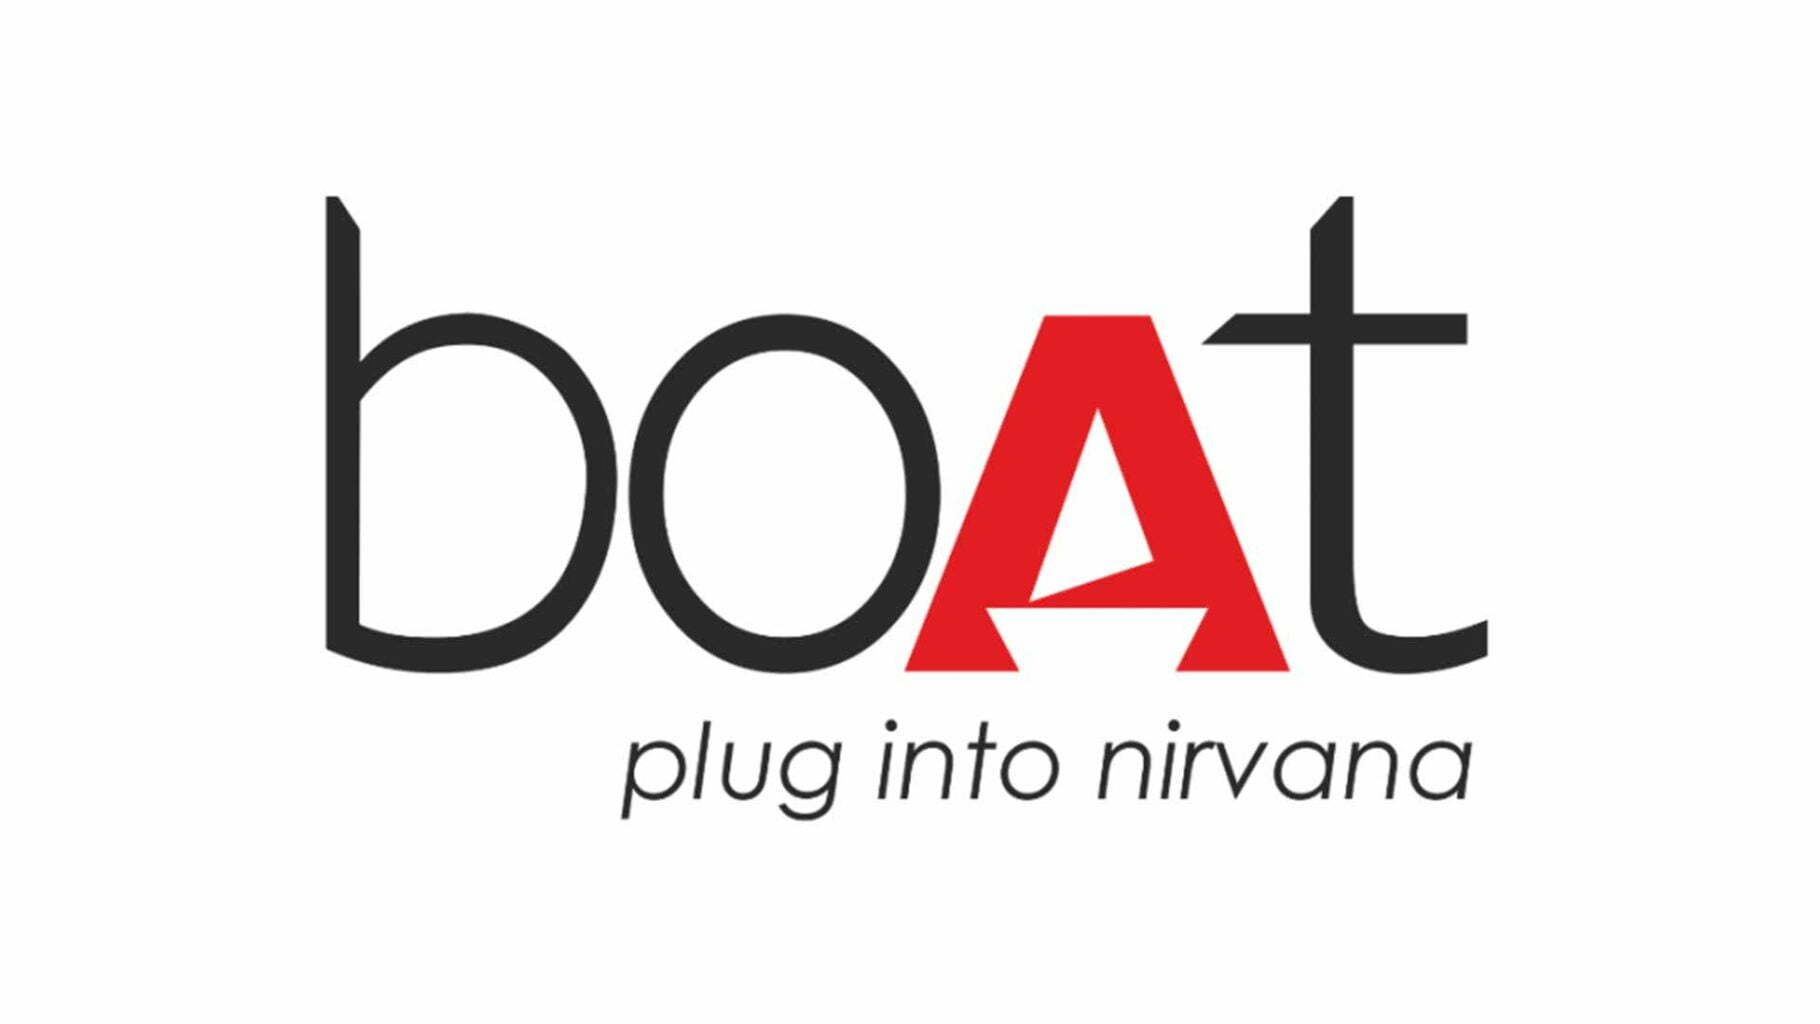 about boat